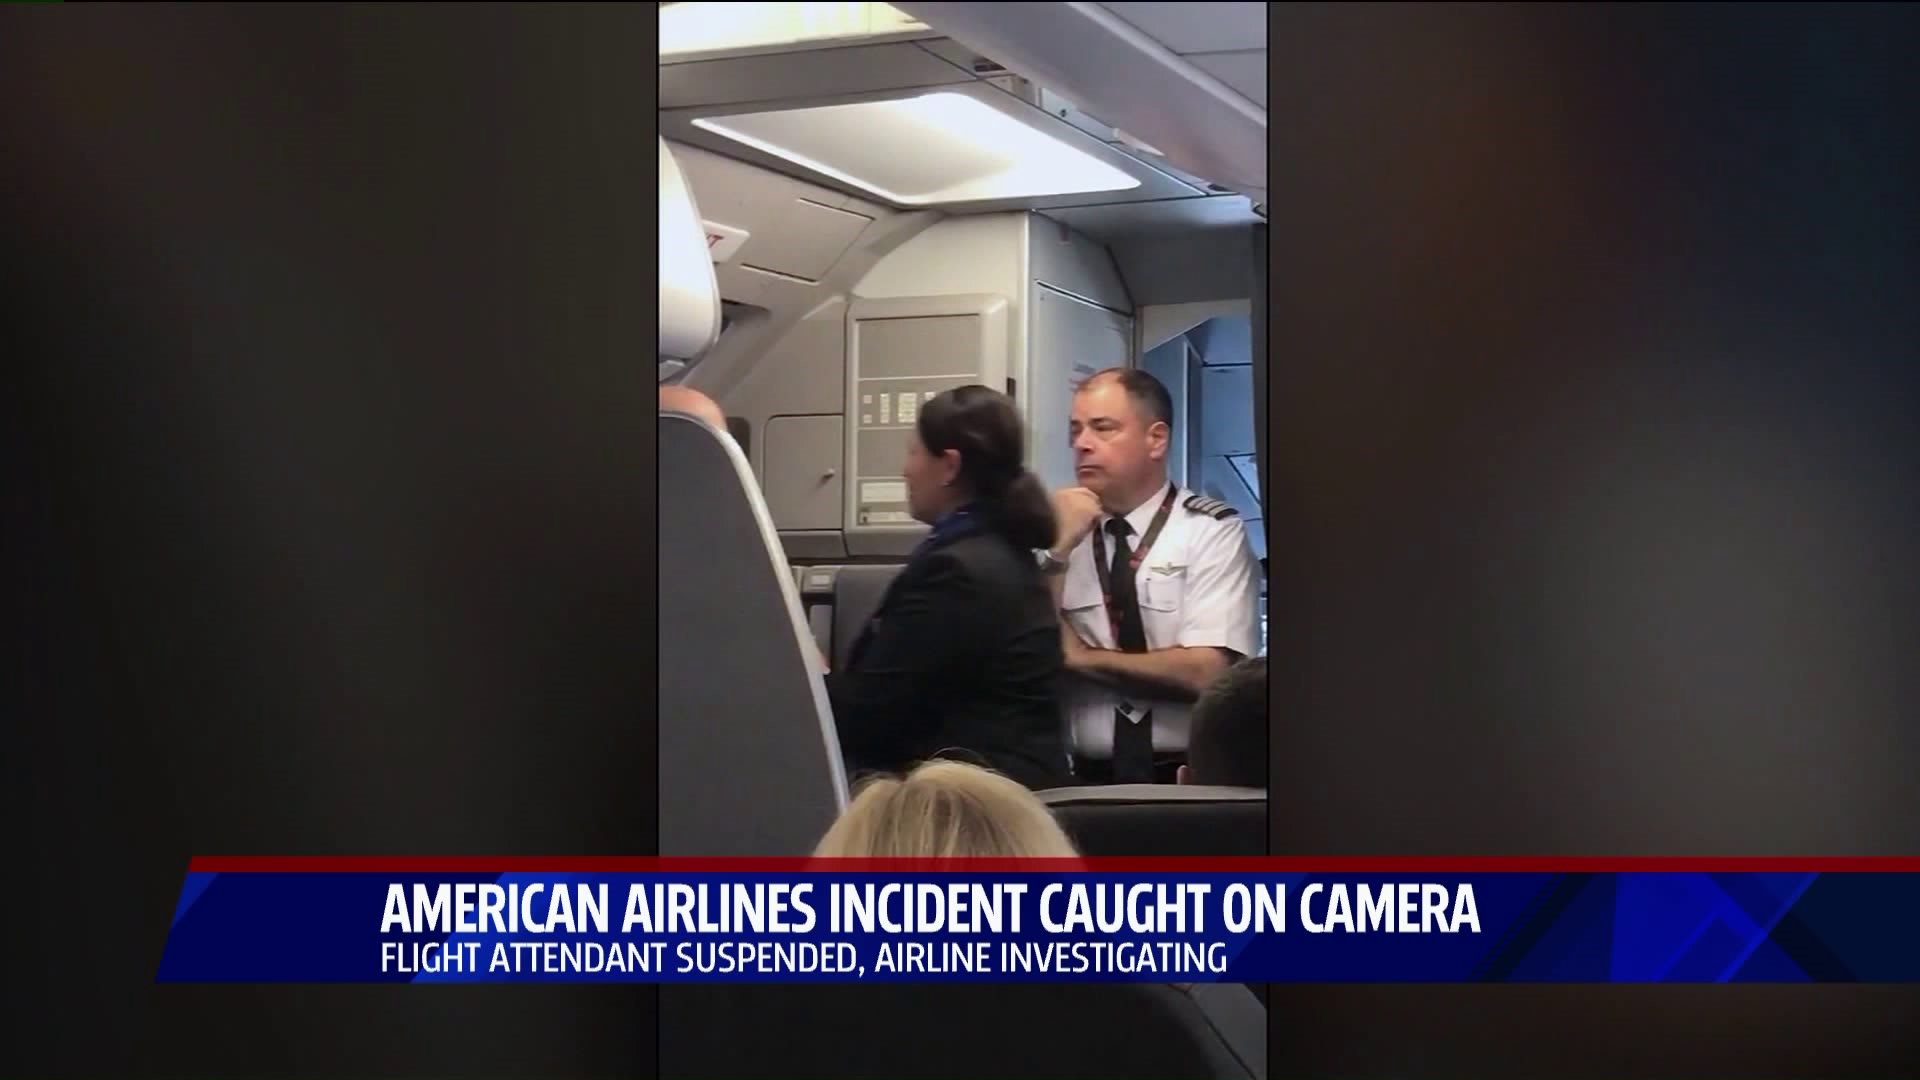 Video shows flight attendant telling passenger `hit me` following stroller incident; American Airlines investigating